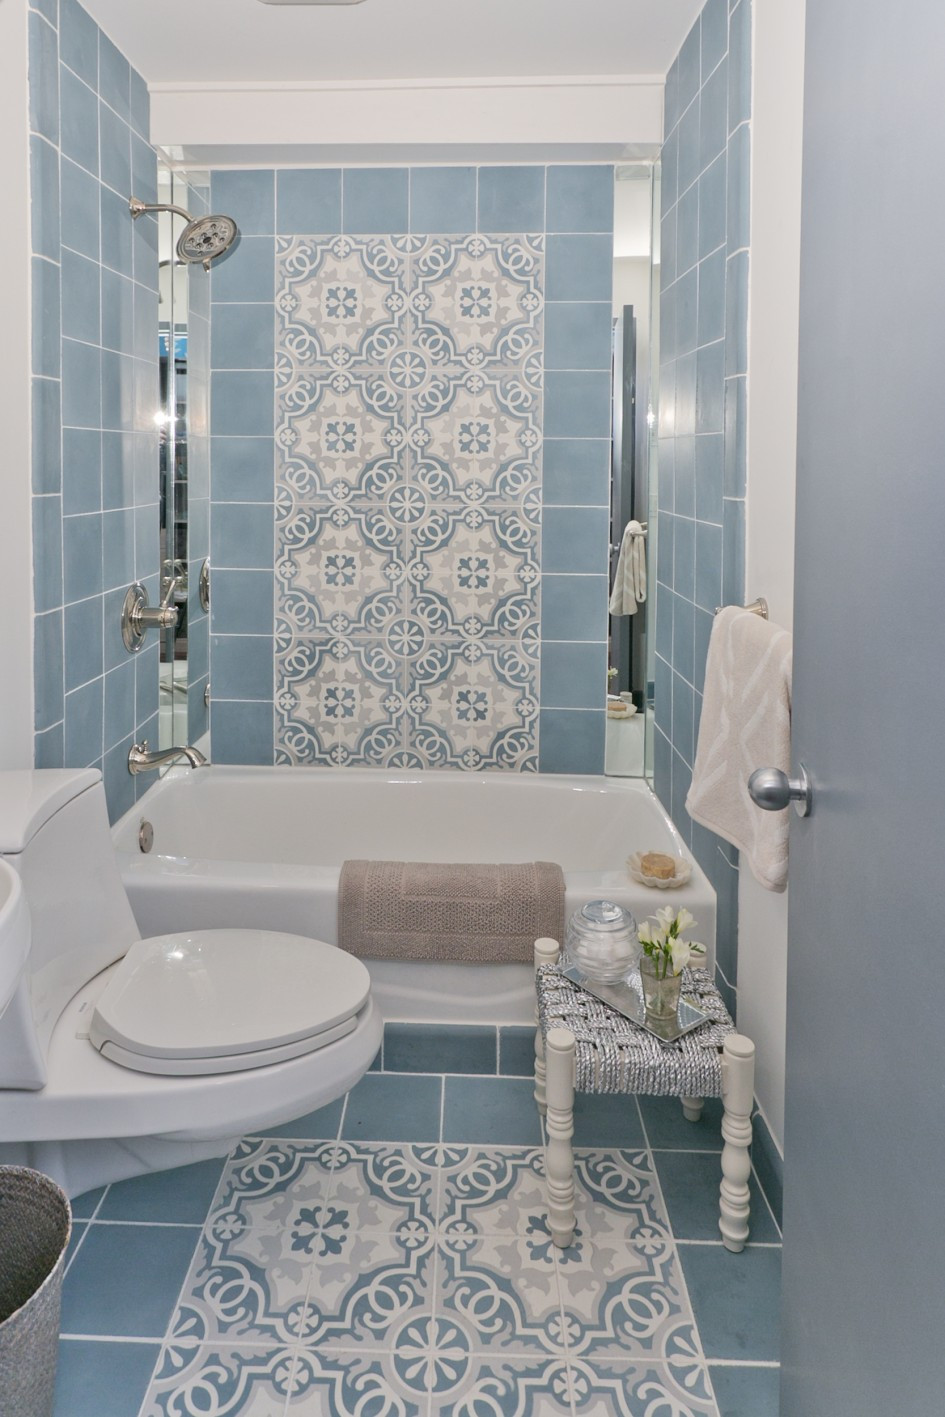 Tile Designs For Bathroom
 30 great pictures and ideas of old fashioned bathroom tile